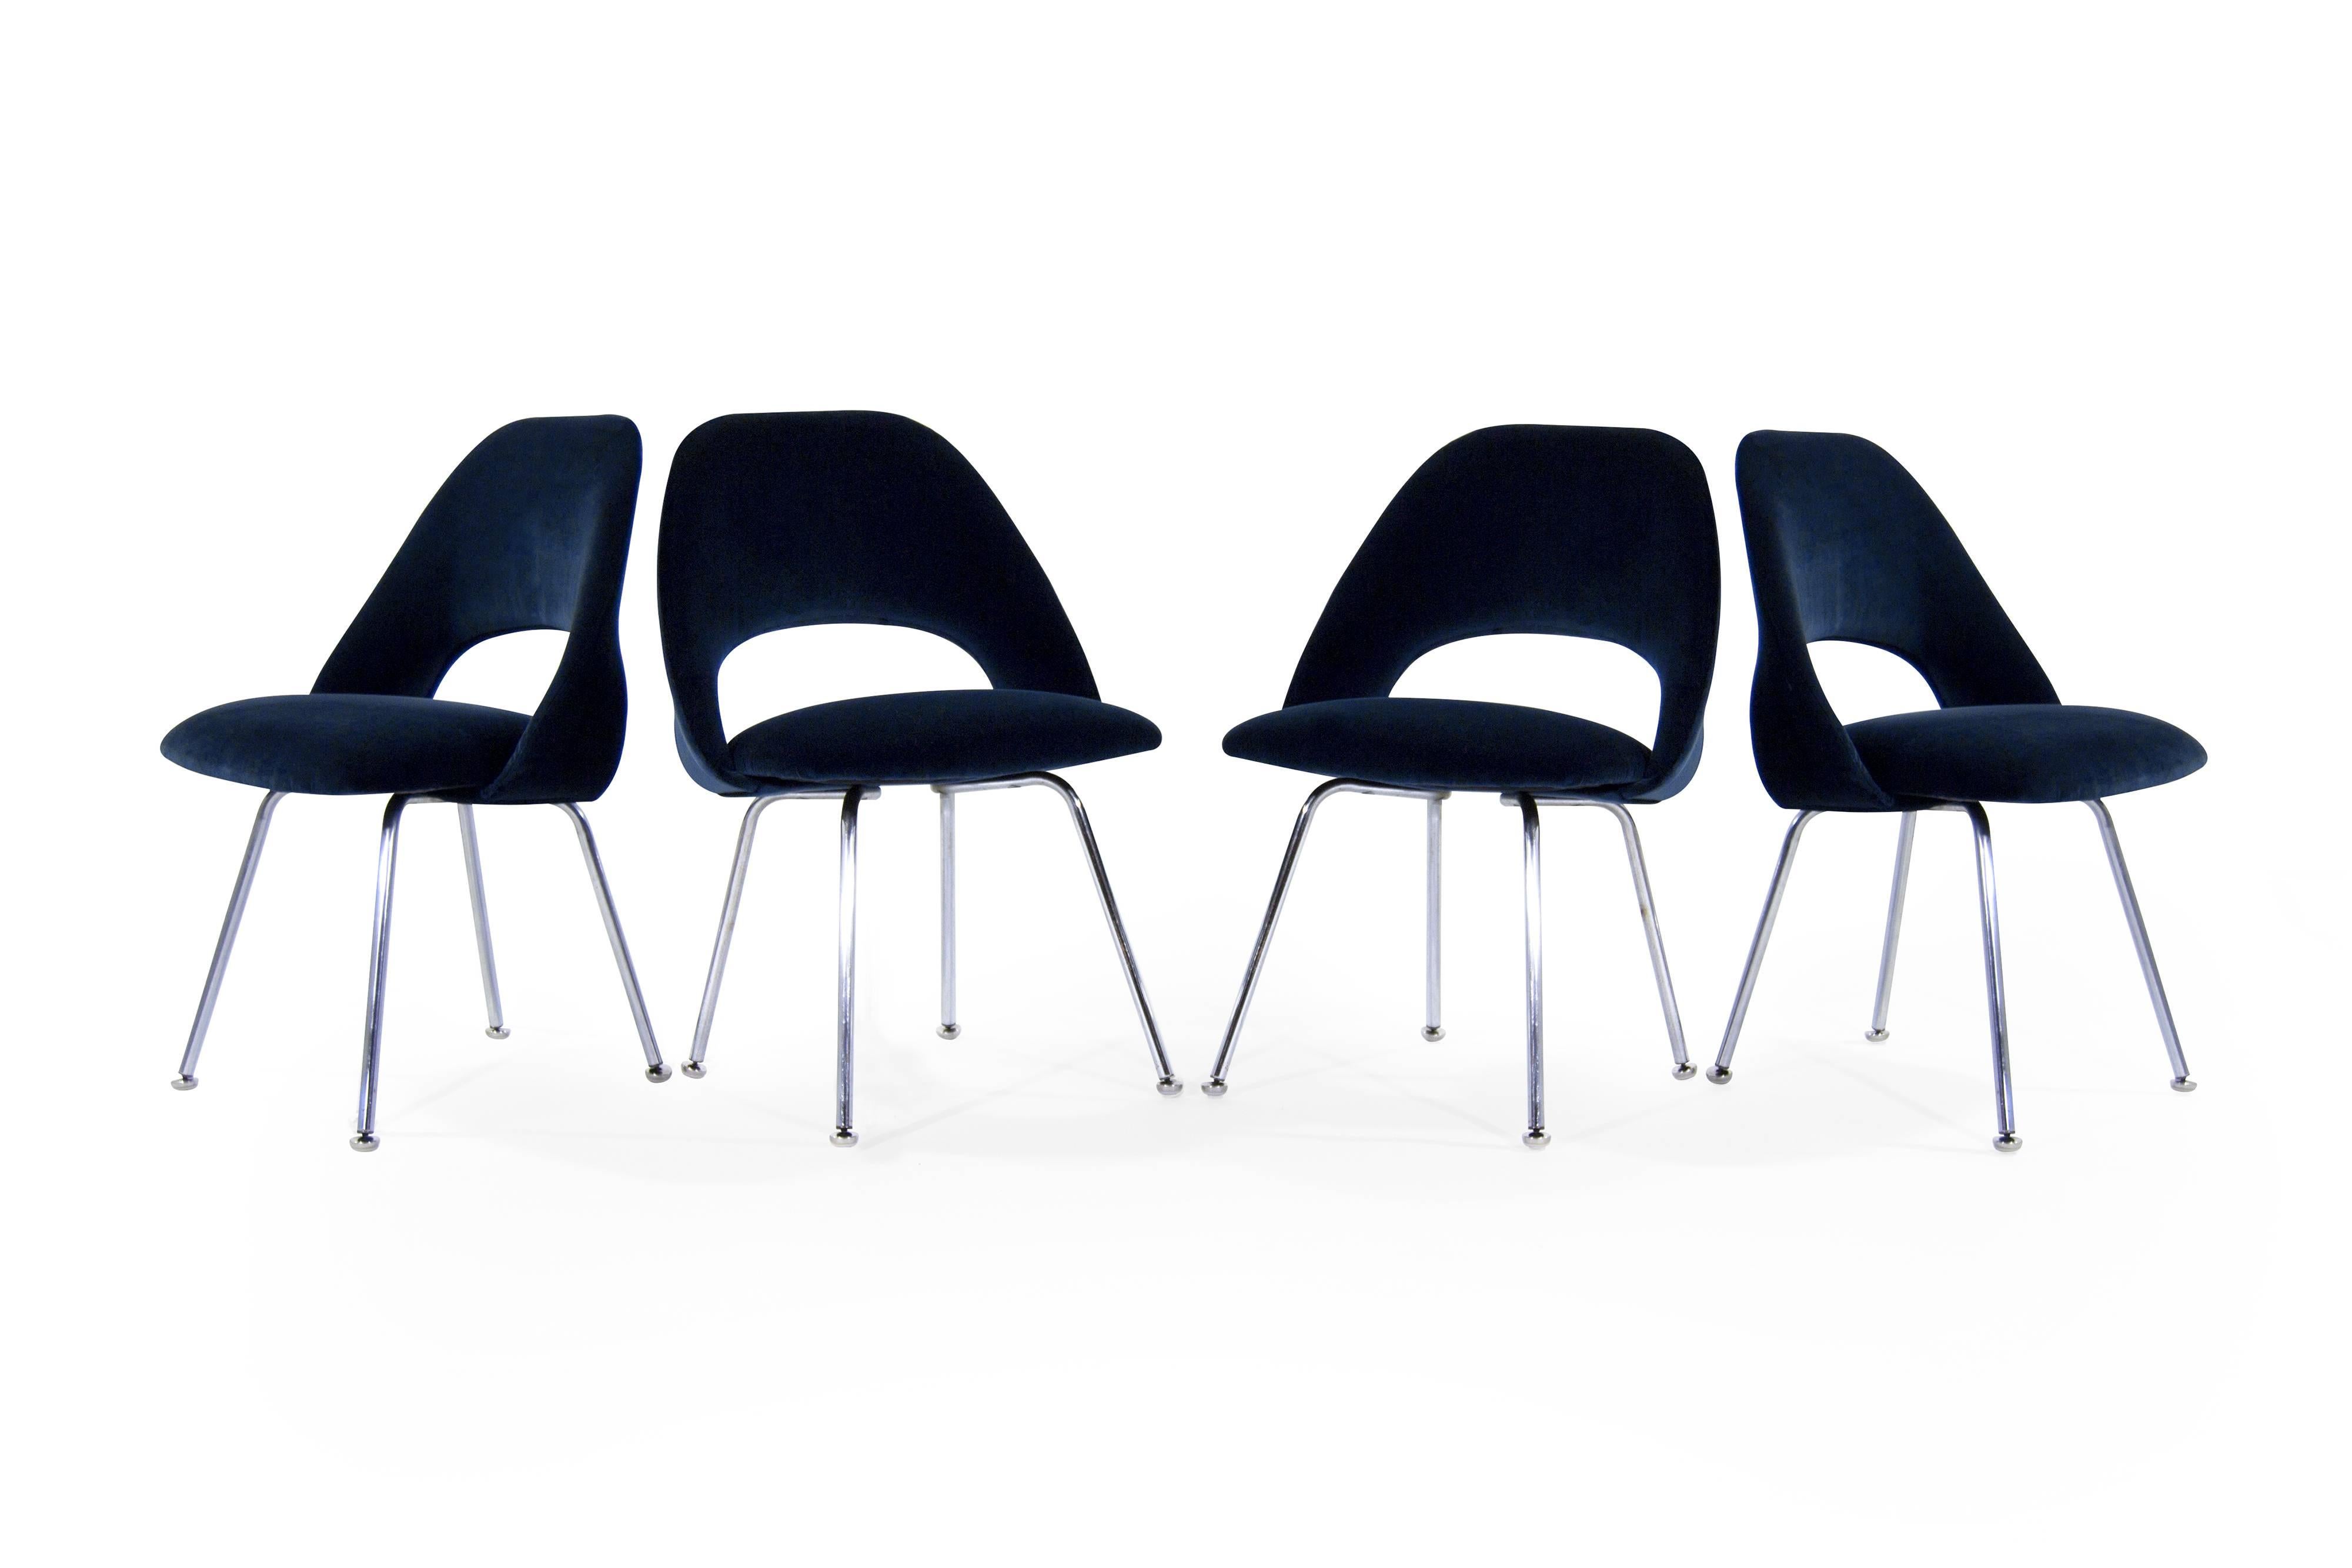 American Set of Four Eero Saarinen for Florence Knoll Executive Side Chairs